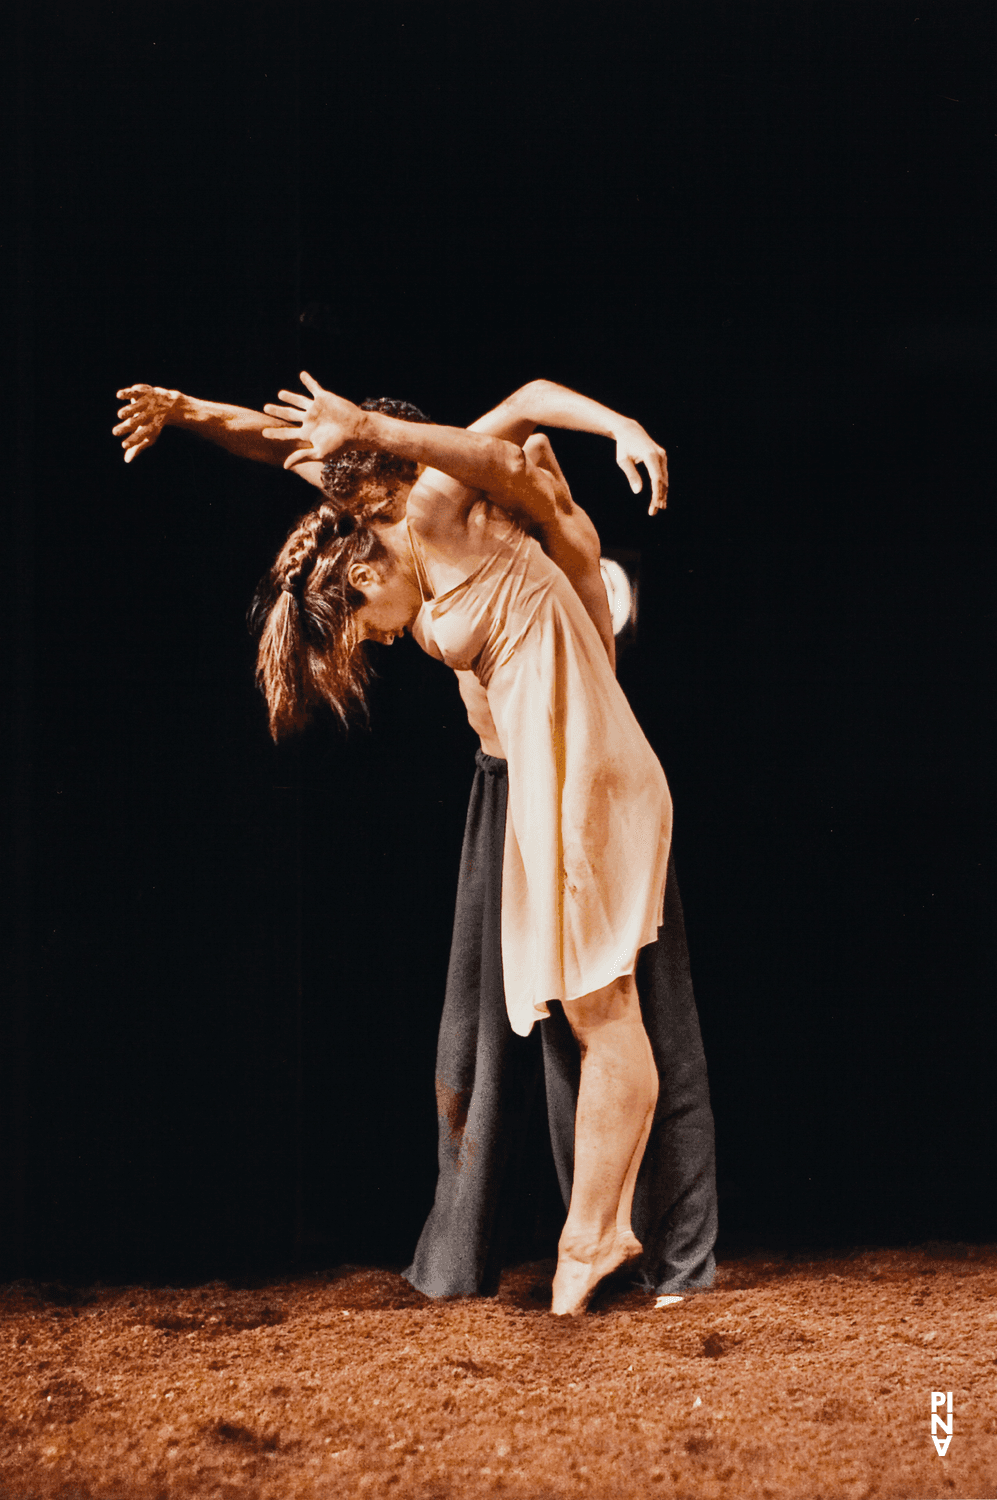 Fernando Suels Mendoza and Silvia Farias Heredia in “The Rite of Spring” by Pina Bausch